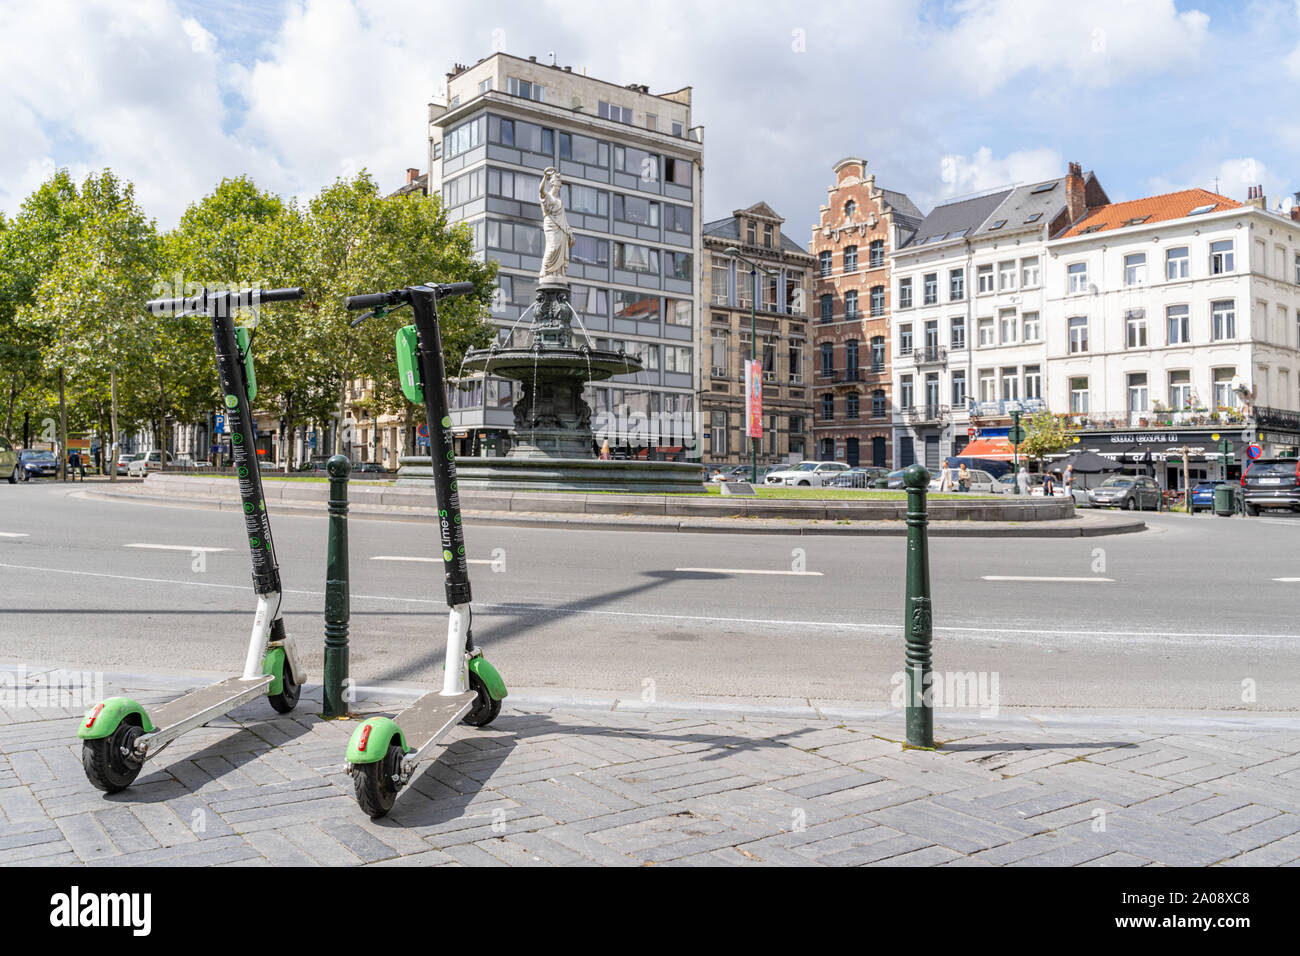 Rental electric scooters on a Place Rouppe square in Brussels, Belgium.  View on Fontein van het Rouppeplein, La Font Stock Photo - Alamy